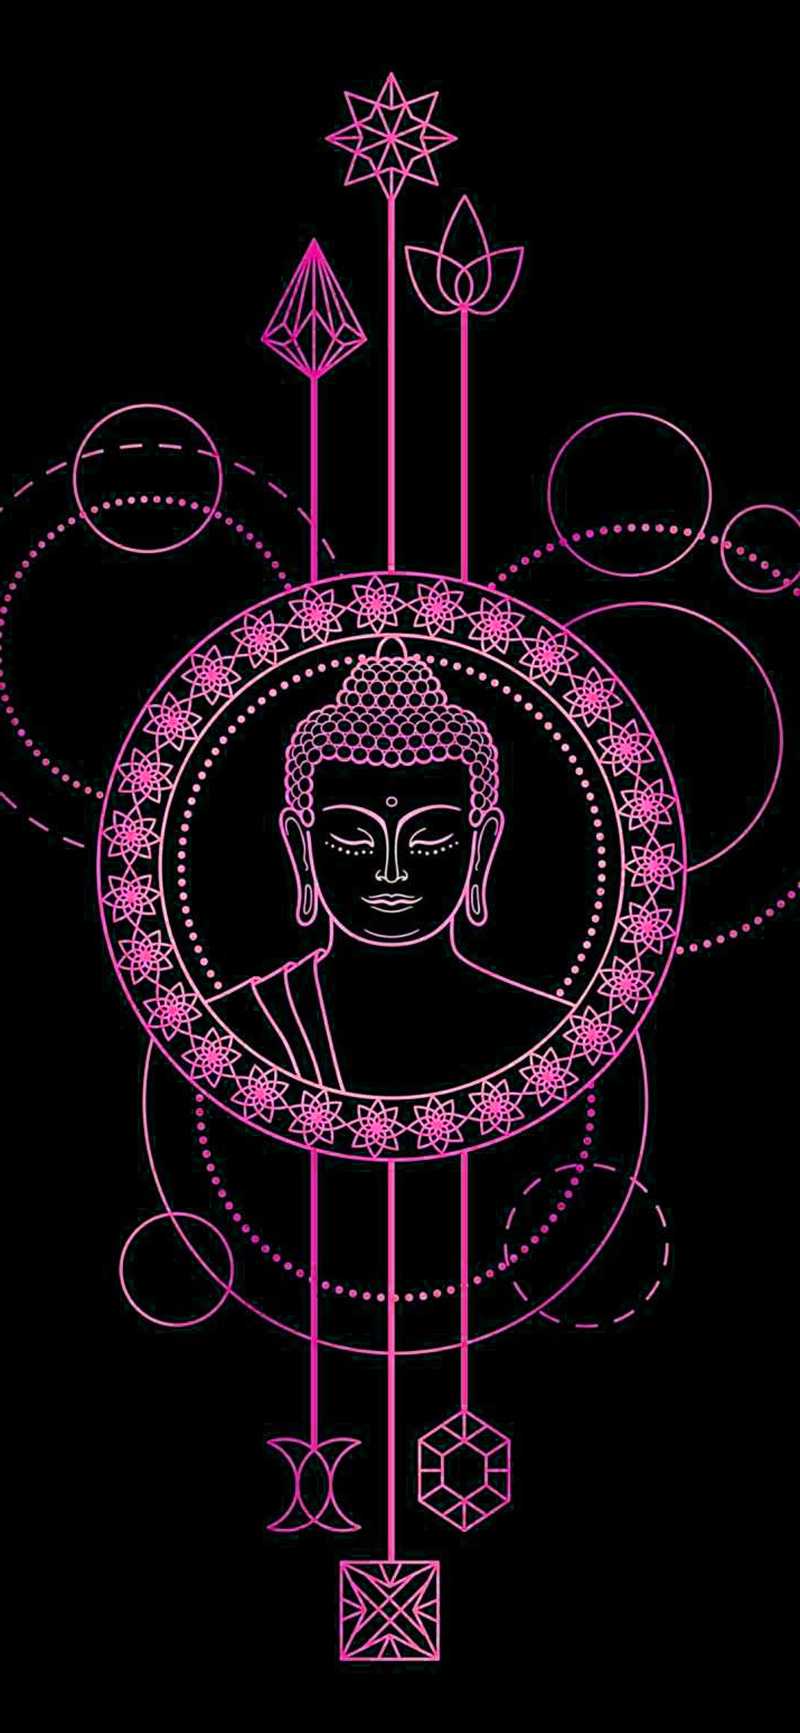 Neon pink outline of a buddha, surrounded by geometric shapes, on a black background, phone wallpaper - Spiritual